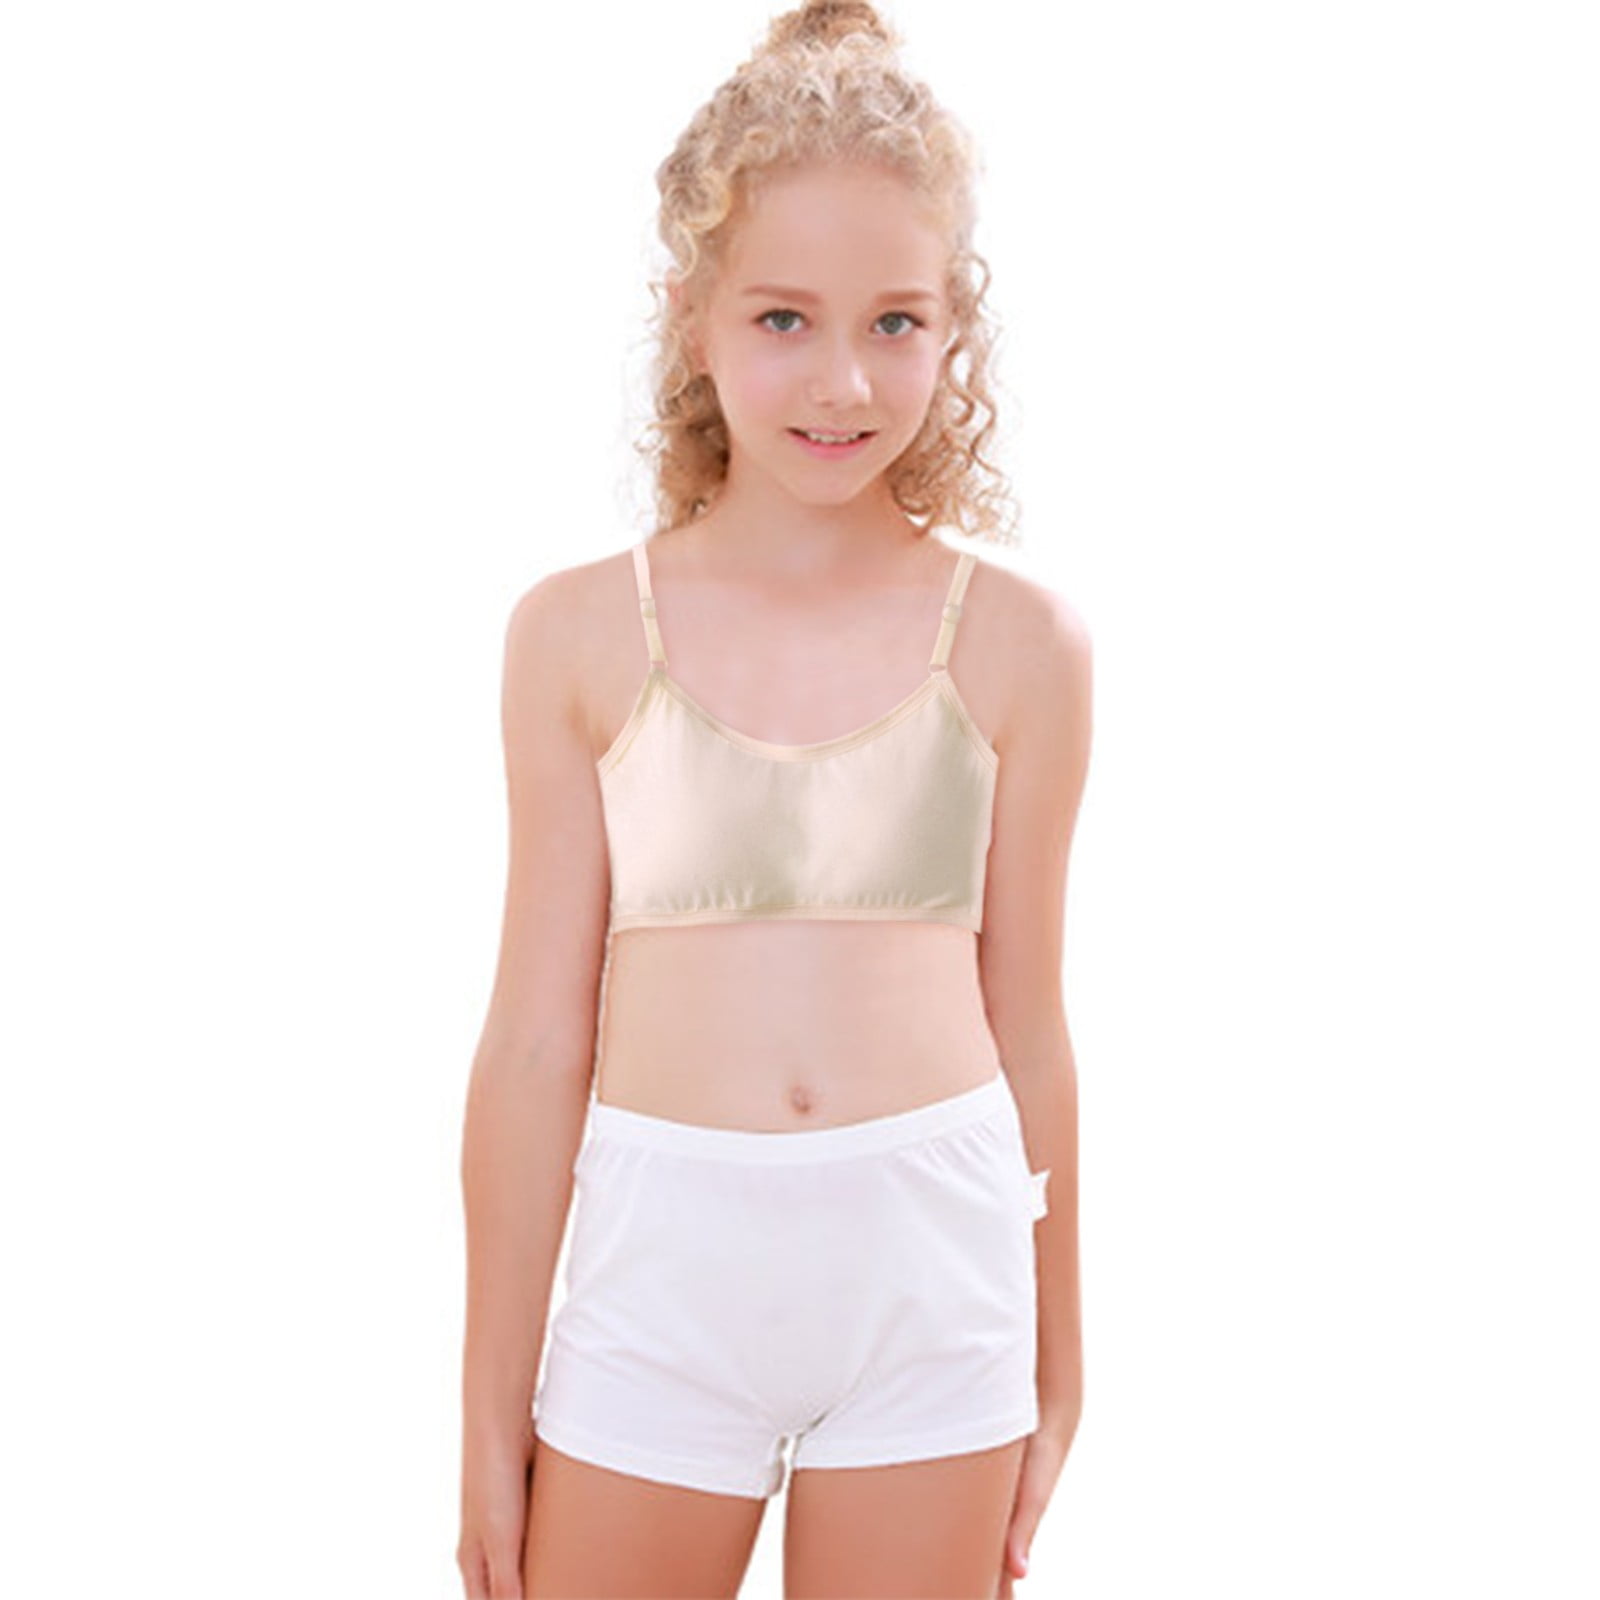 Does the average 12-year-old wear a trainer bra, or has she moved